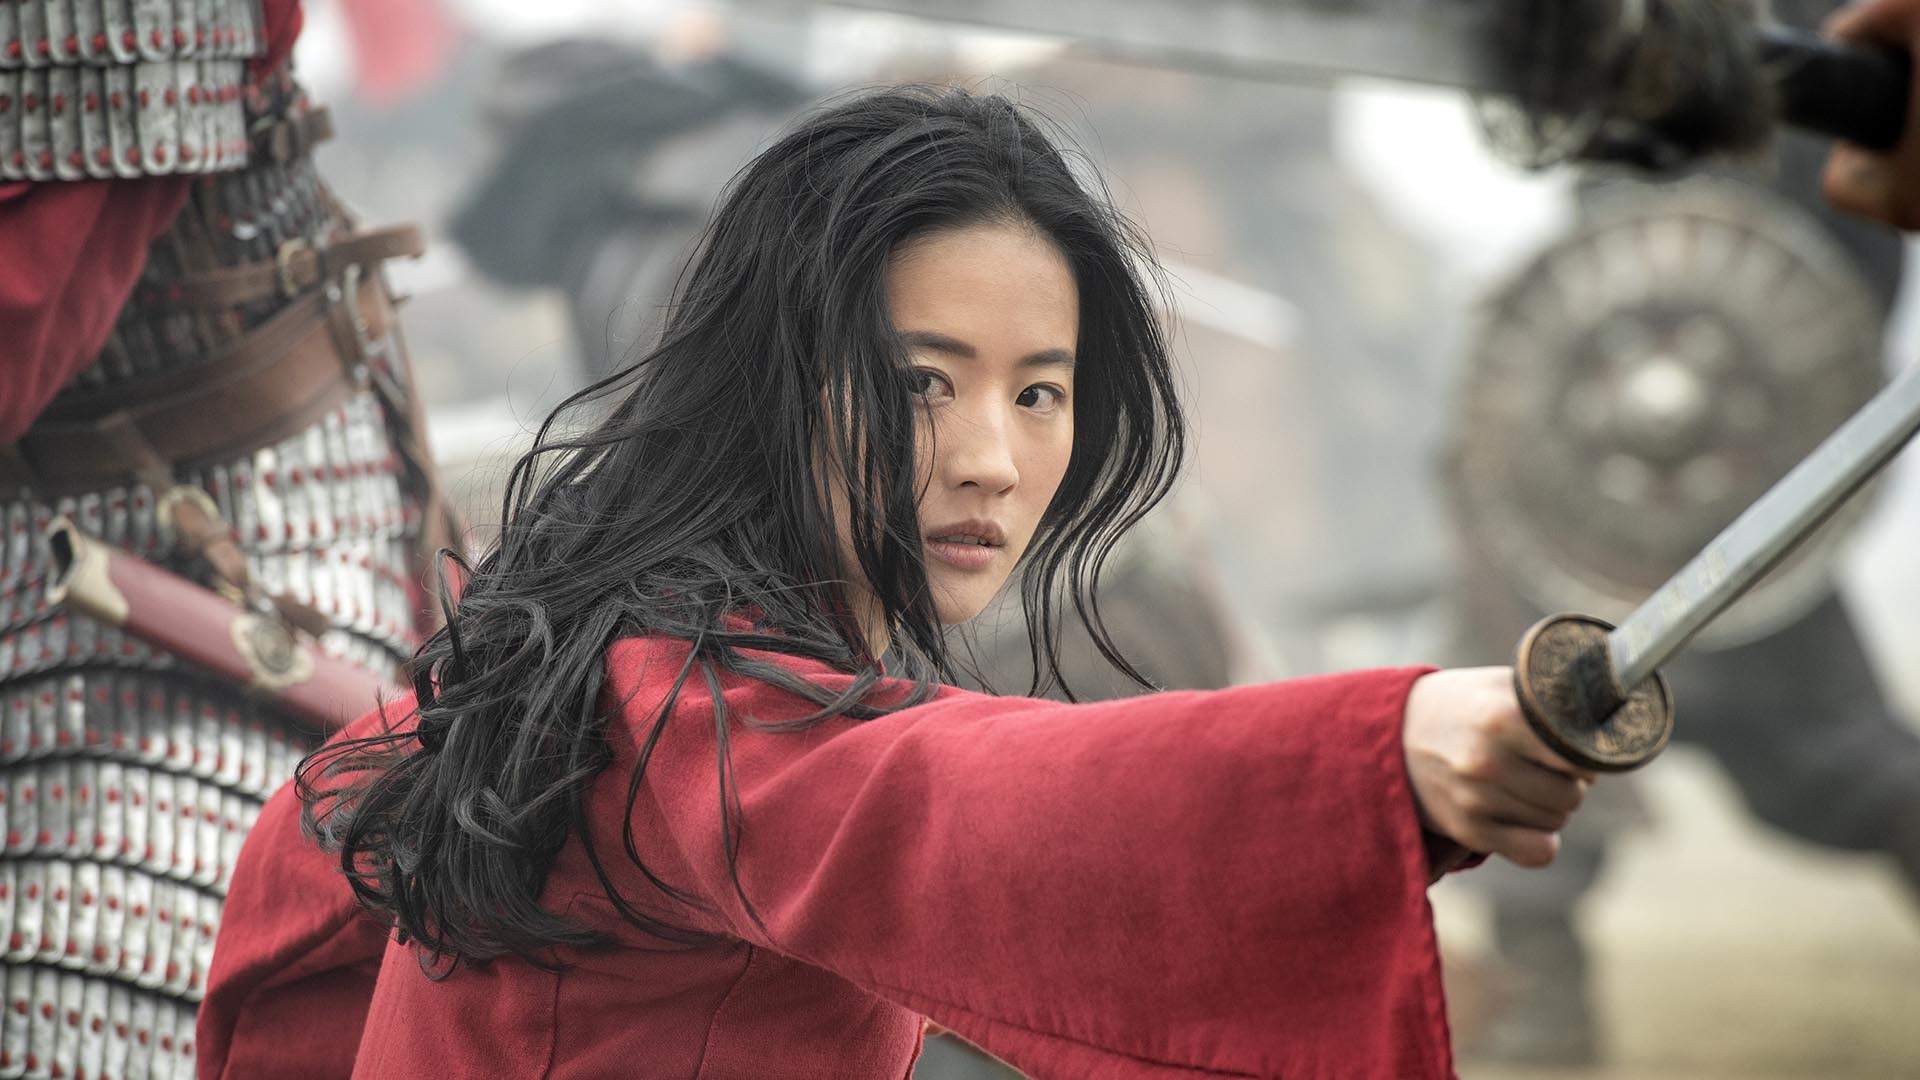 Disney Is Sending Its Live-Action Version of 'Mulan' Direct to Video on Demand Next Month